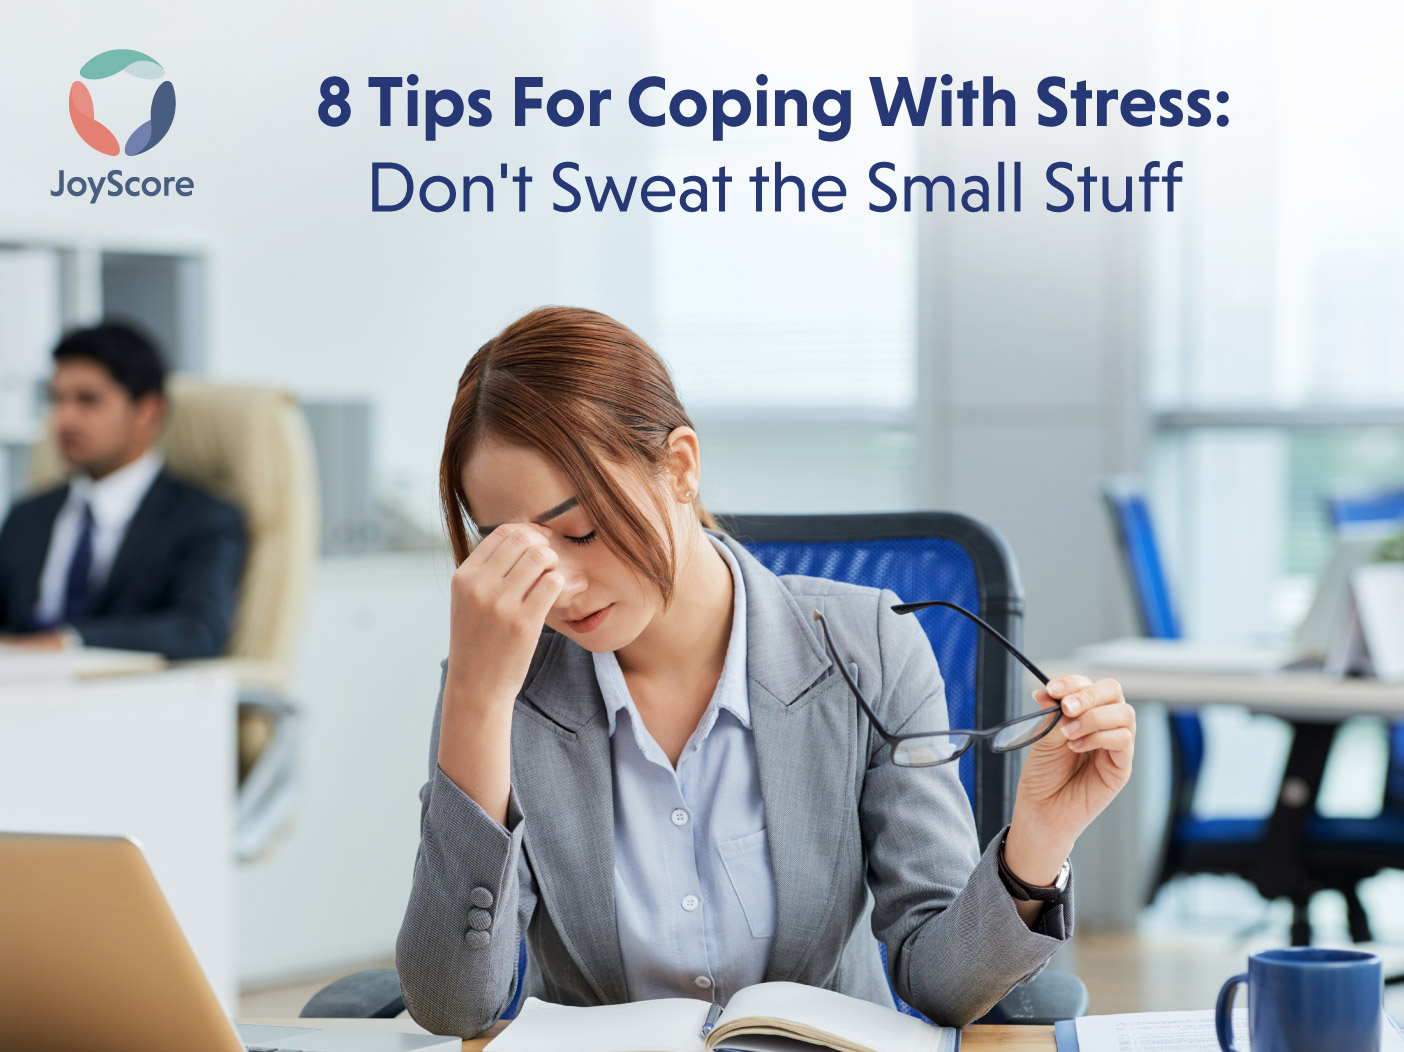 8 Tips for Coping with Stress: Don’t Sweat the Small Stuff